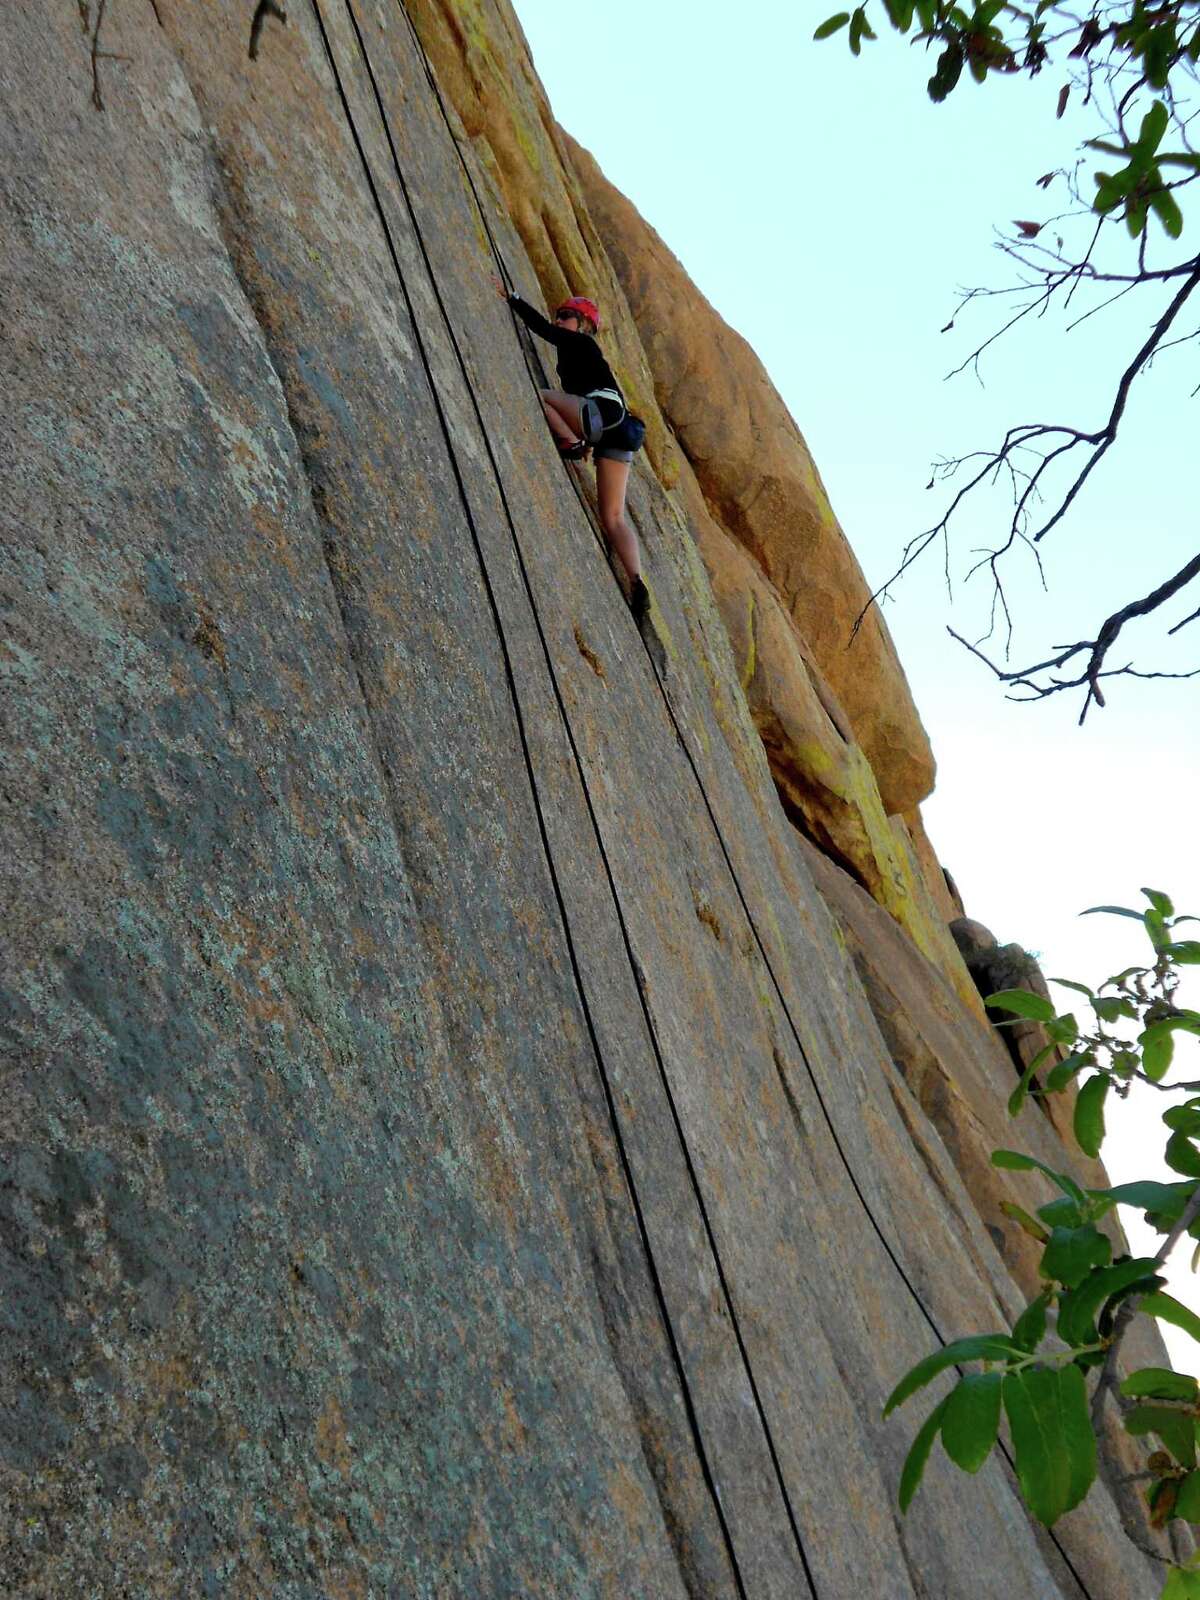 Abbie Frey, of Greenwich, climbs in the Cochise Stronghold, Arizona.